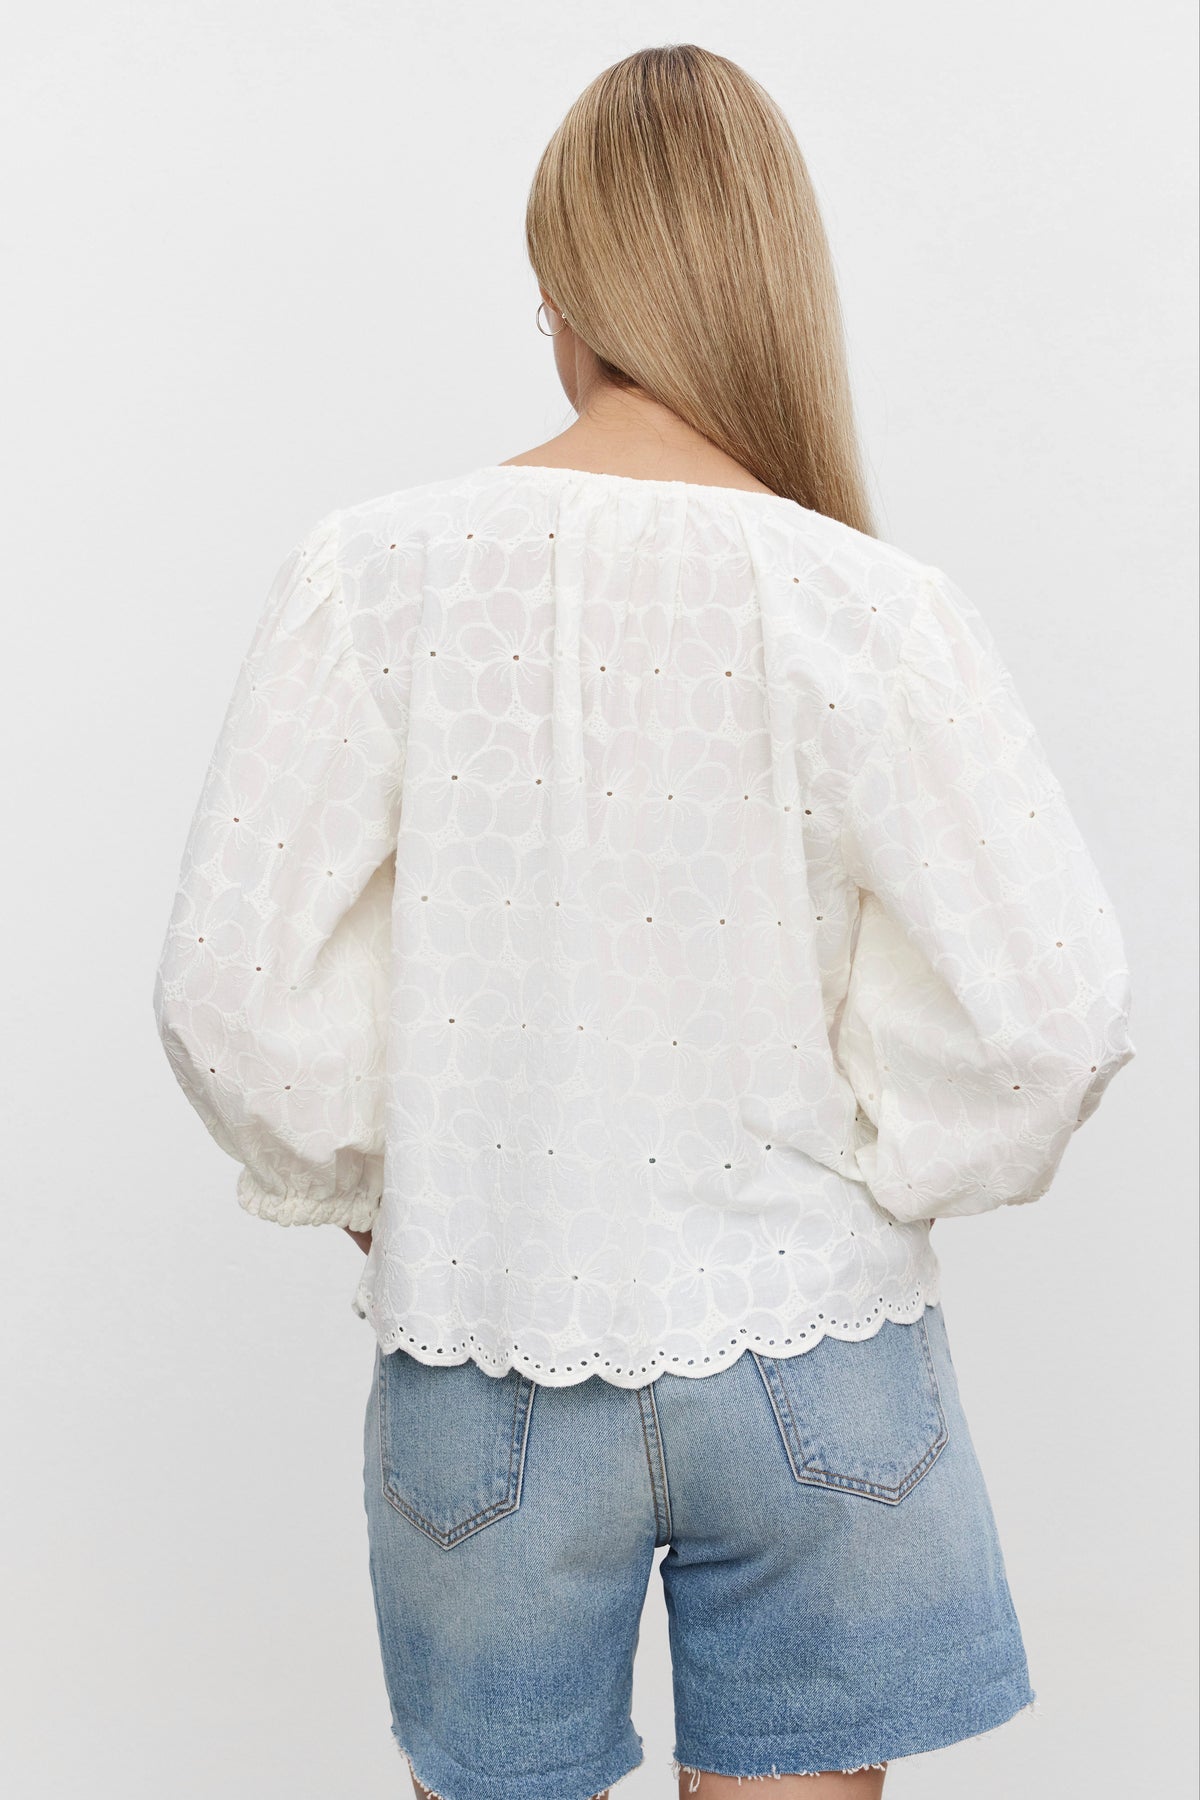 The back view of a woman wearing a Velvet by Graham & Spencer CORINA EMBROIDERED COTTON TOP and denim shorts.-36040412594369